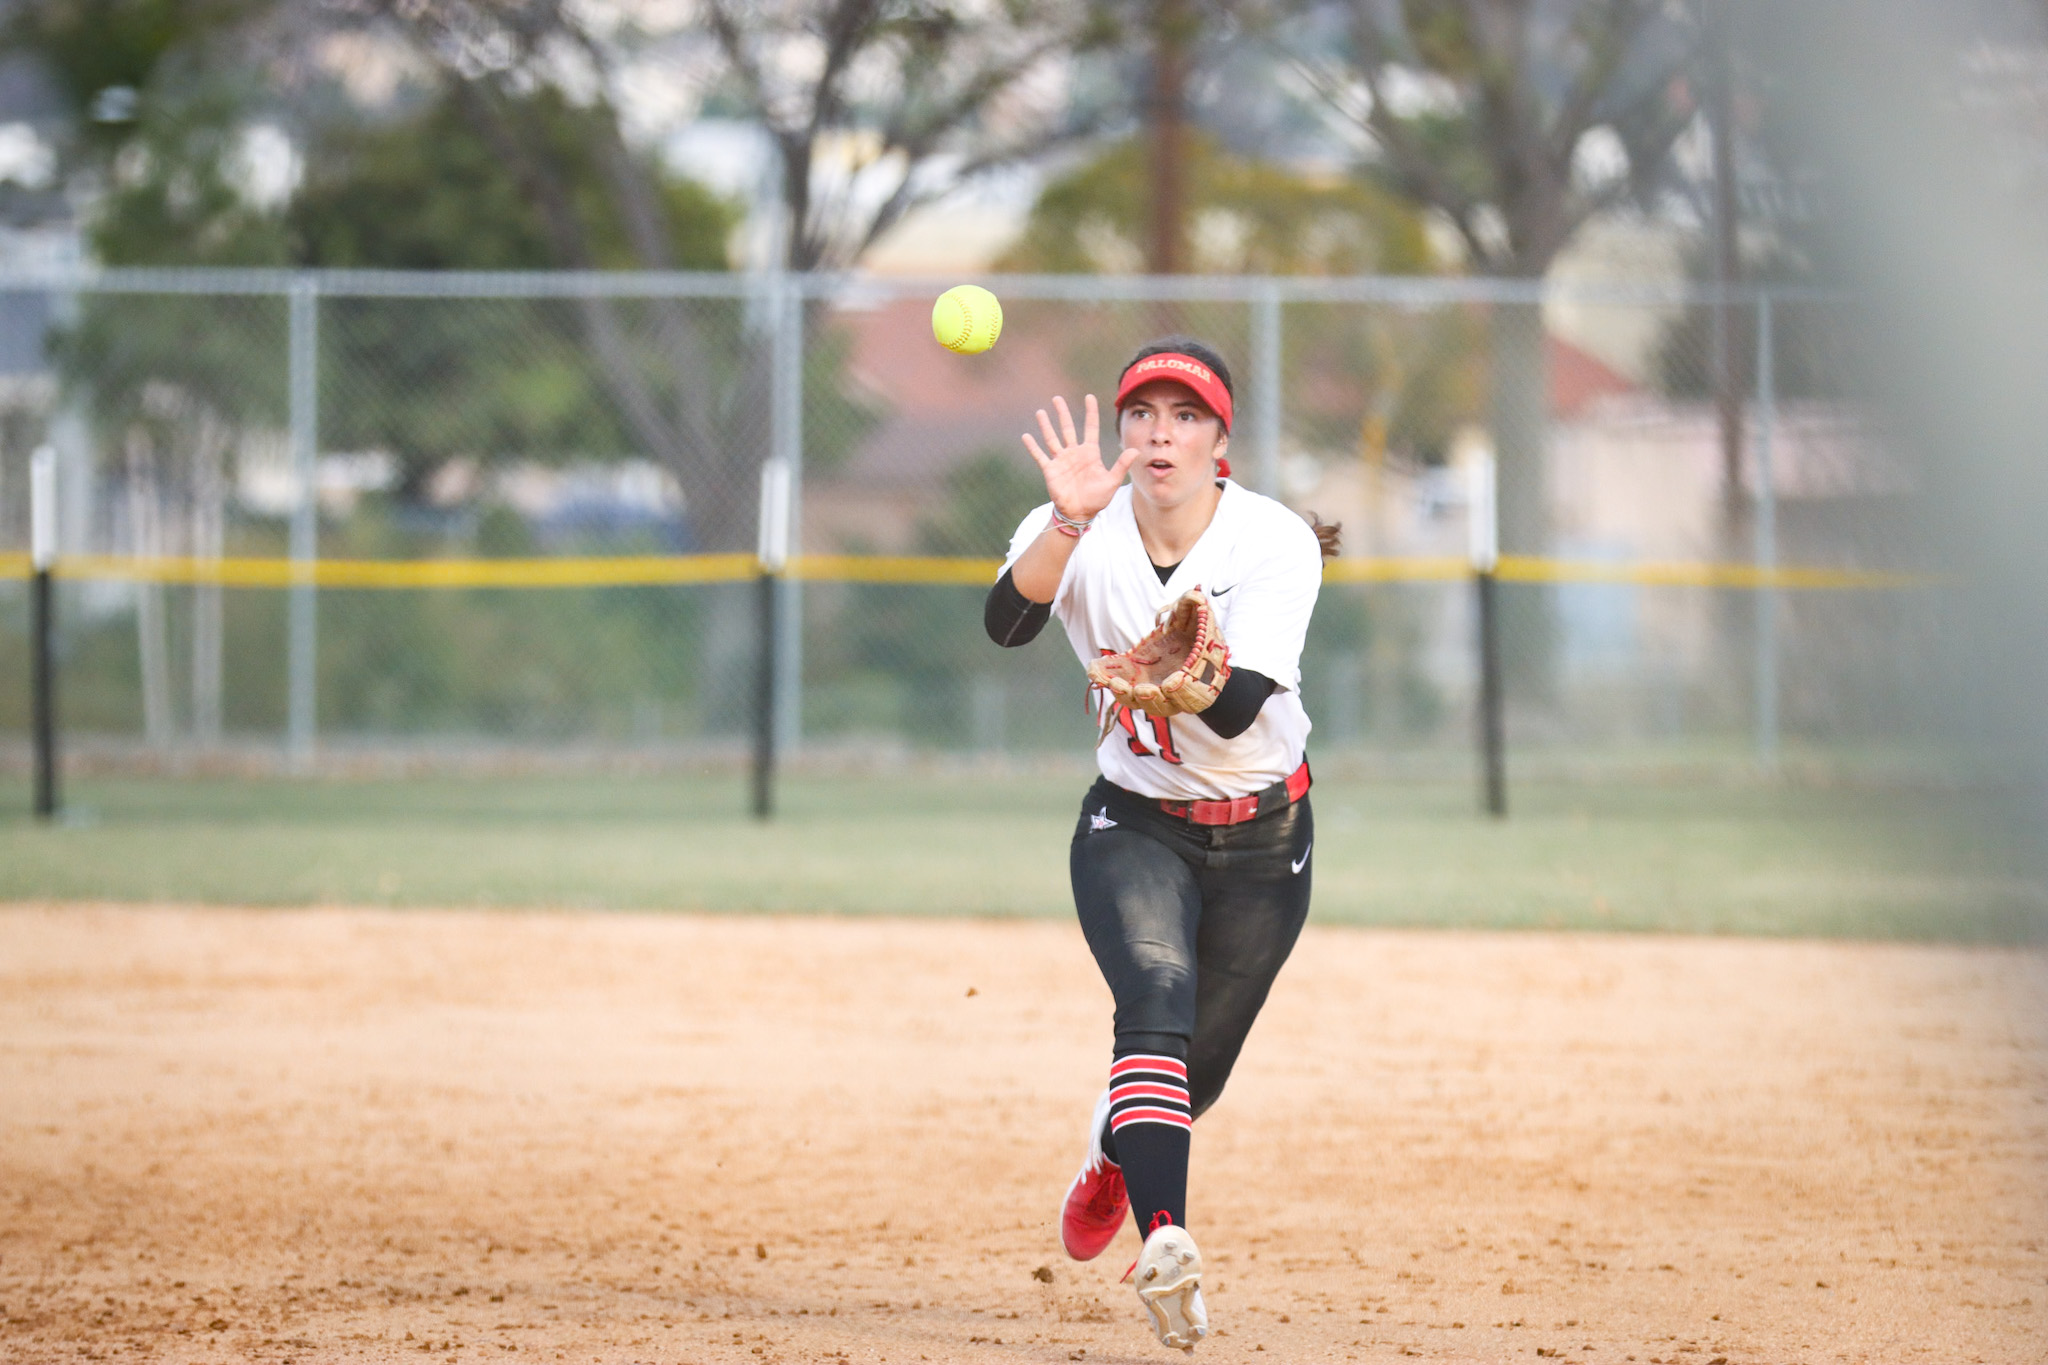 Josephine Hueberger was 5-9 in the two games including two doubles and a triple. Photo by Cara Heise.